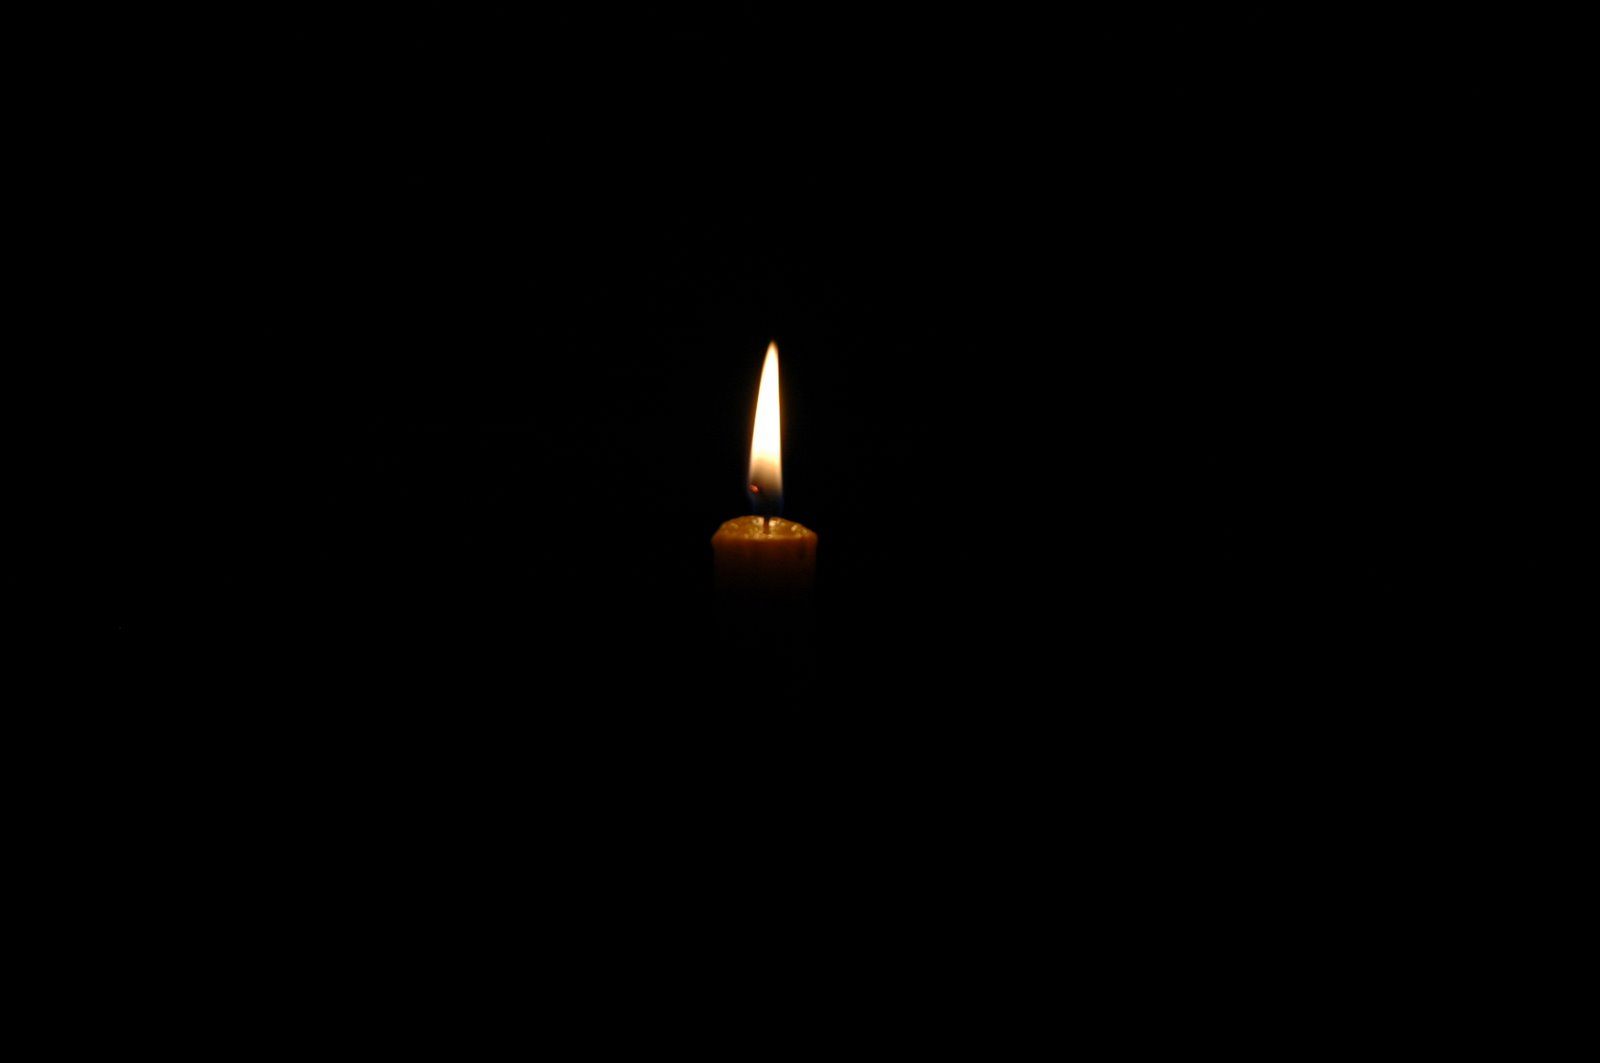 Candlelight in darkness